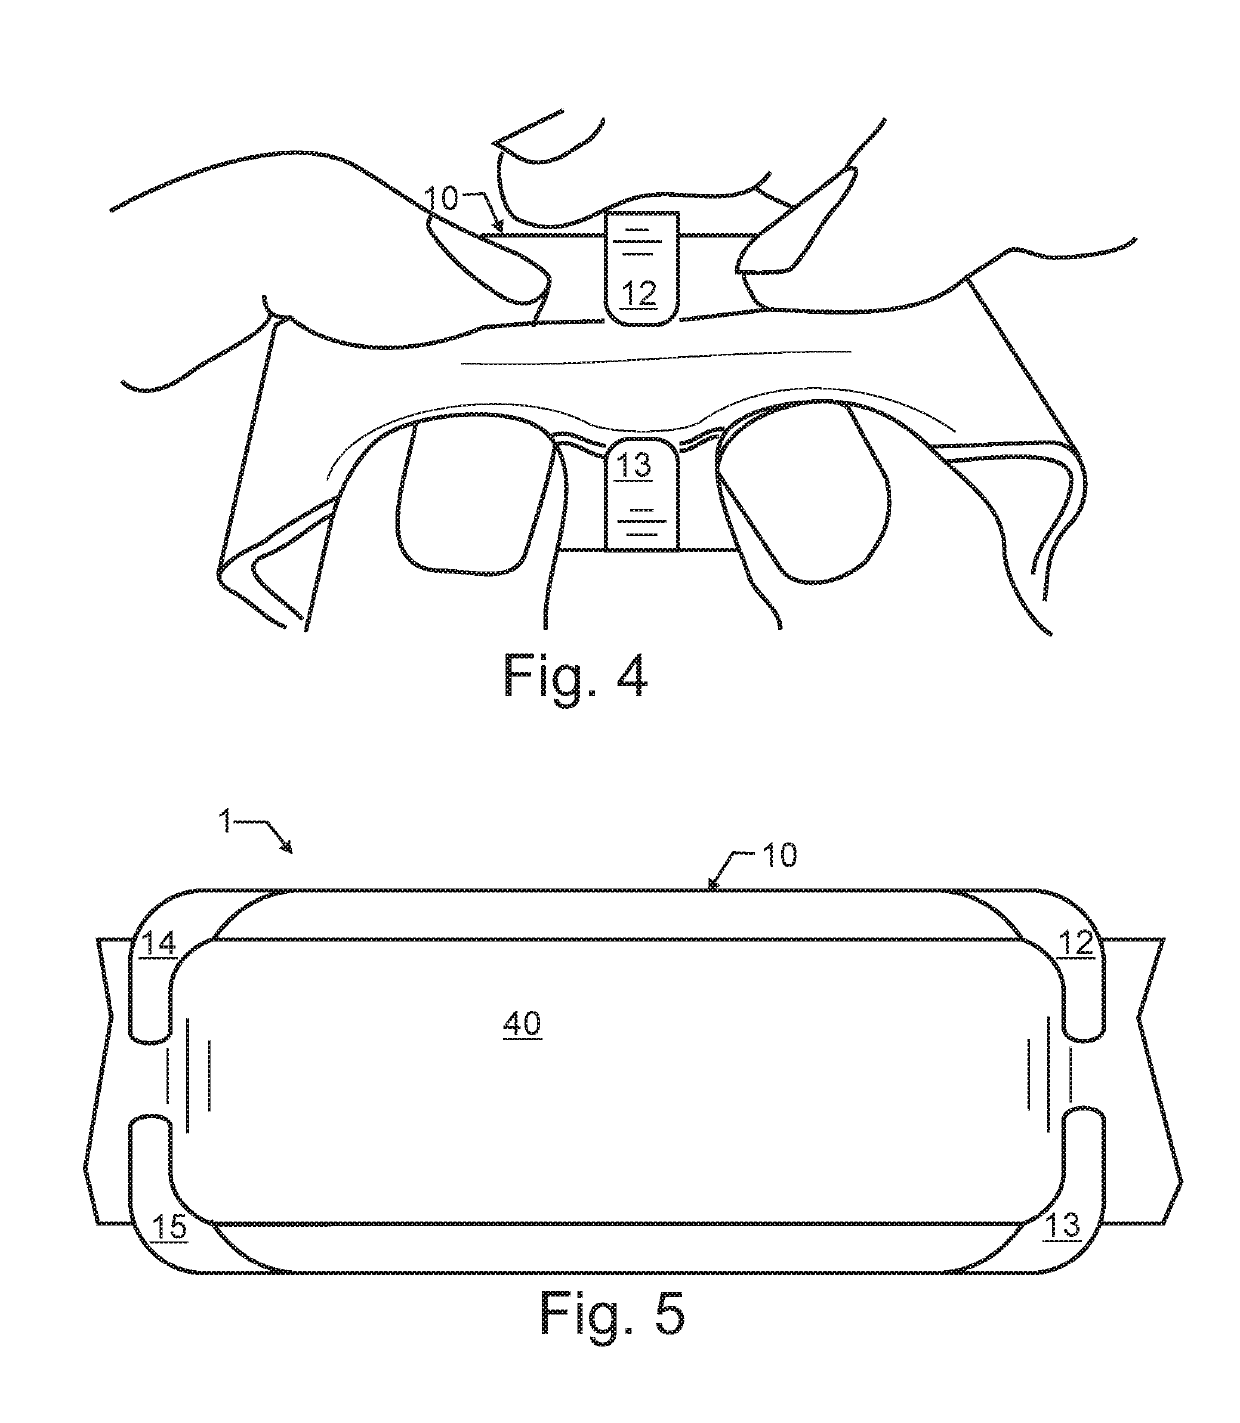 Wireless Location Assisted Zone Guidance System Incorporating a Rapid Collar Mount and Non-Necrotic Stimulation